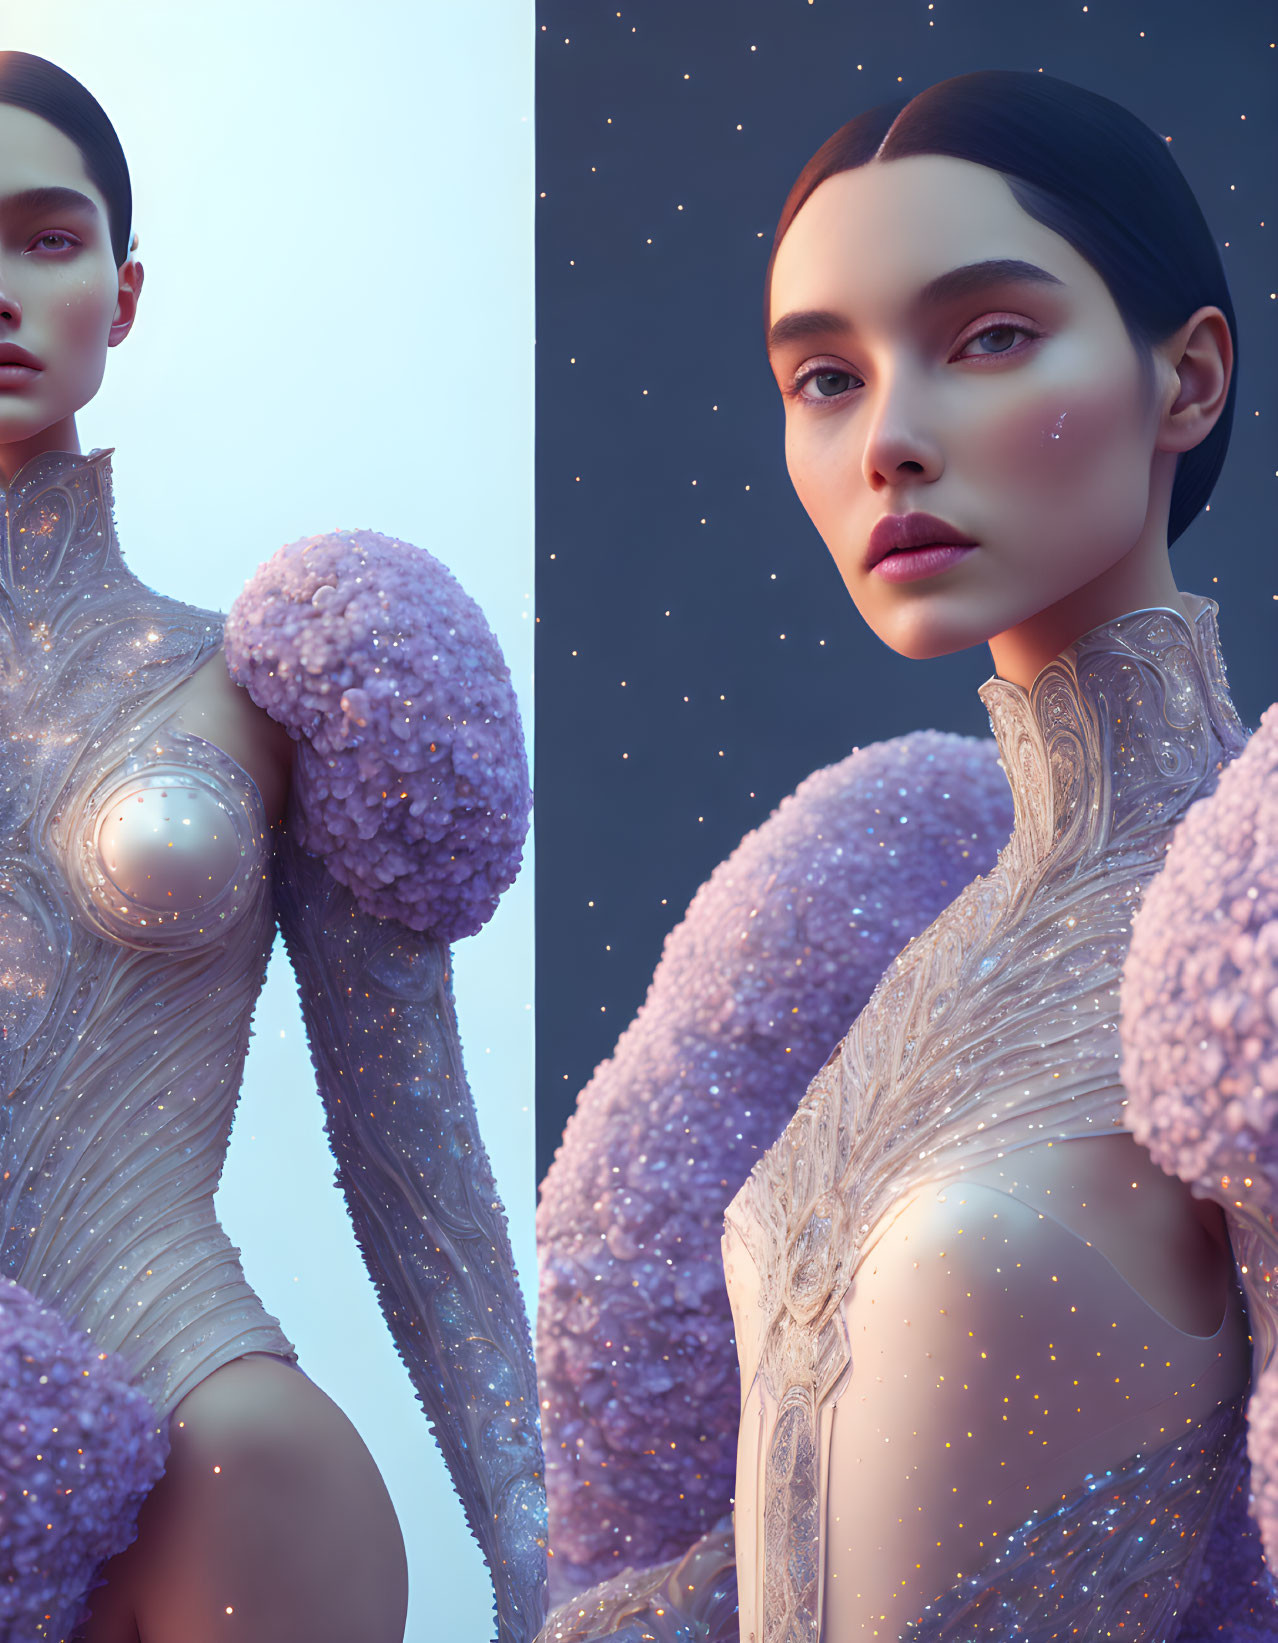 3D-rendered woman in futuristic clothing against starry backdrop